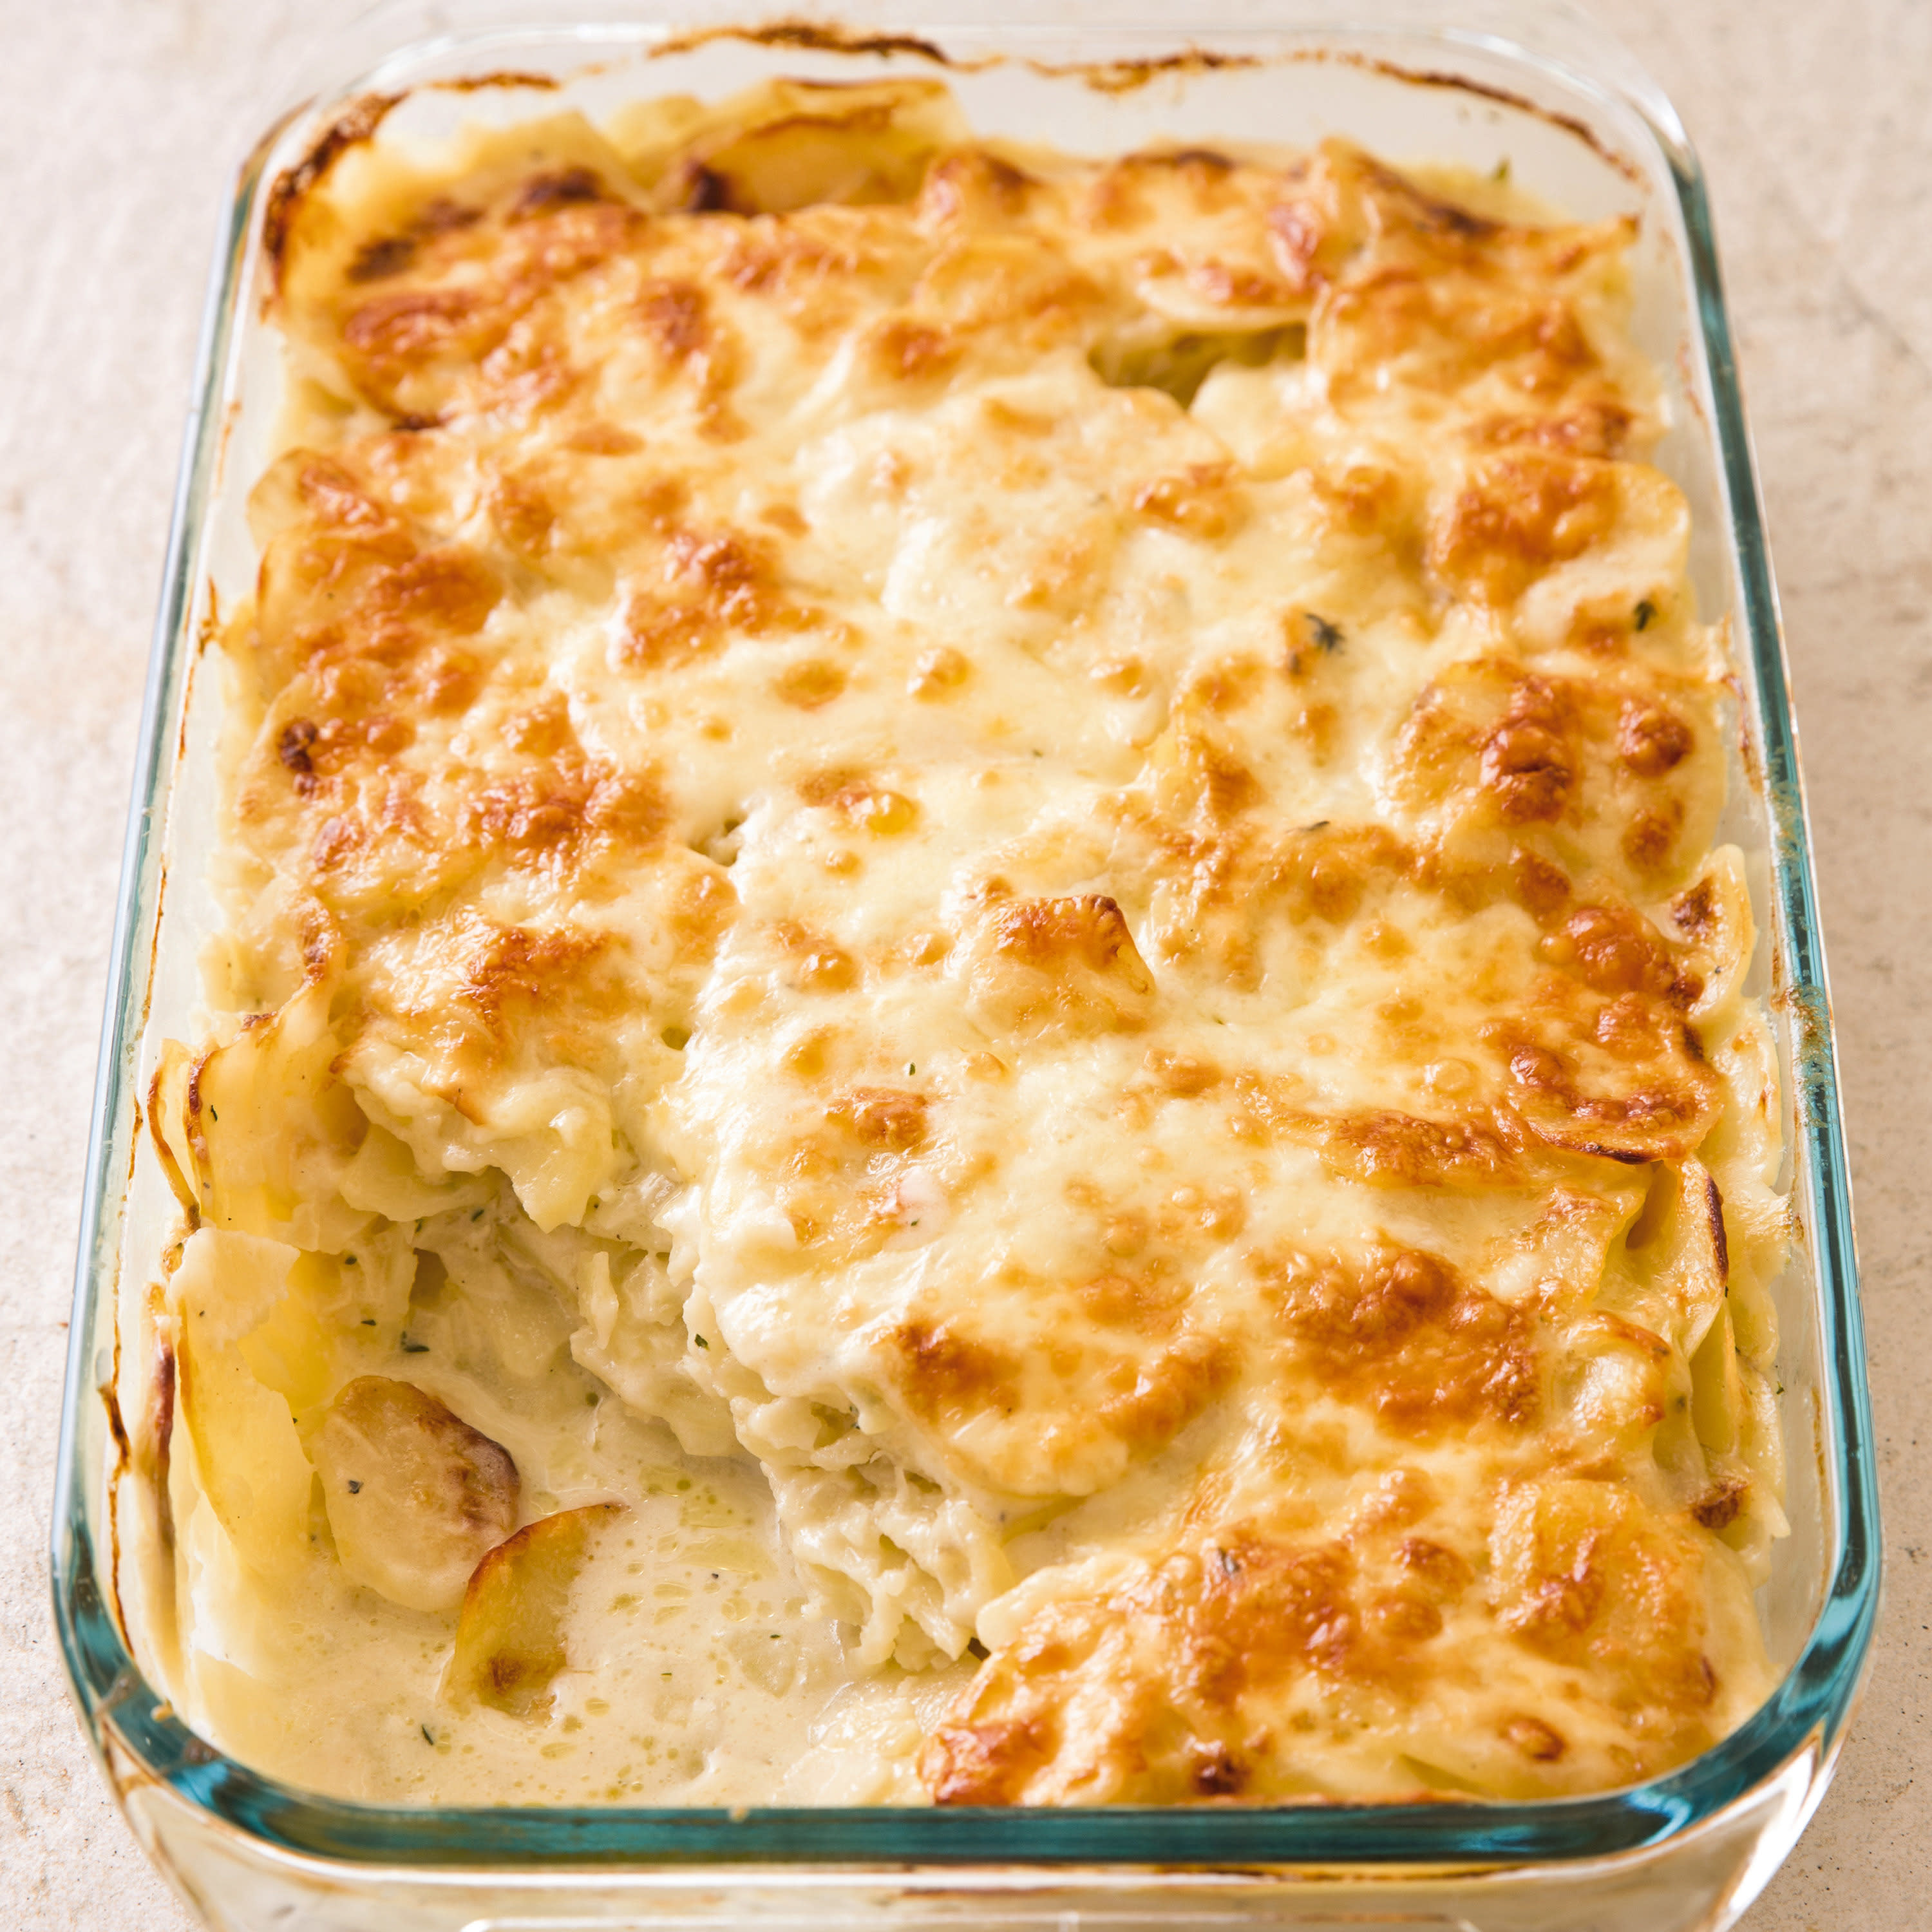 Our creamy scalloped potatoes has a browned, cheesy crust